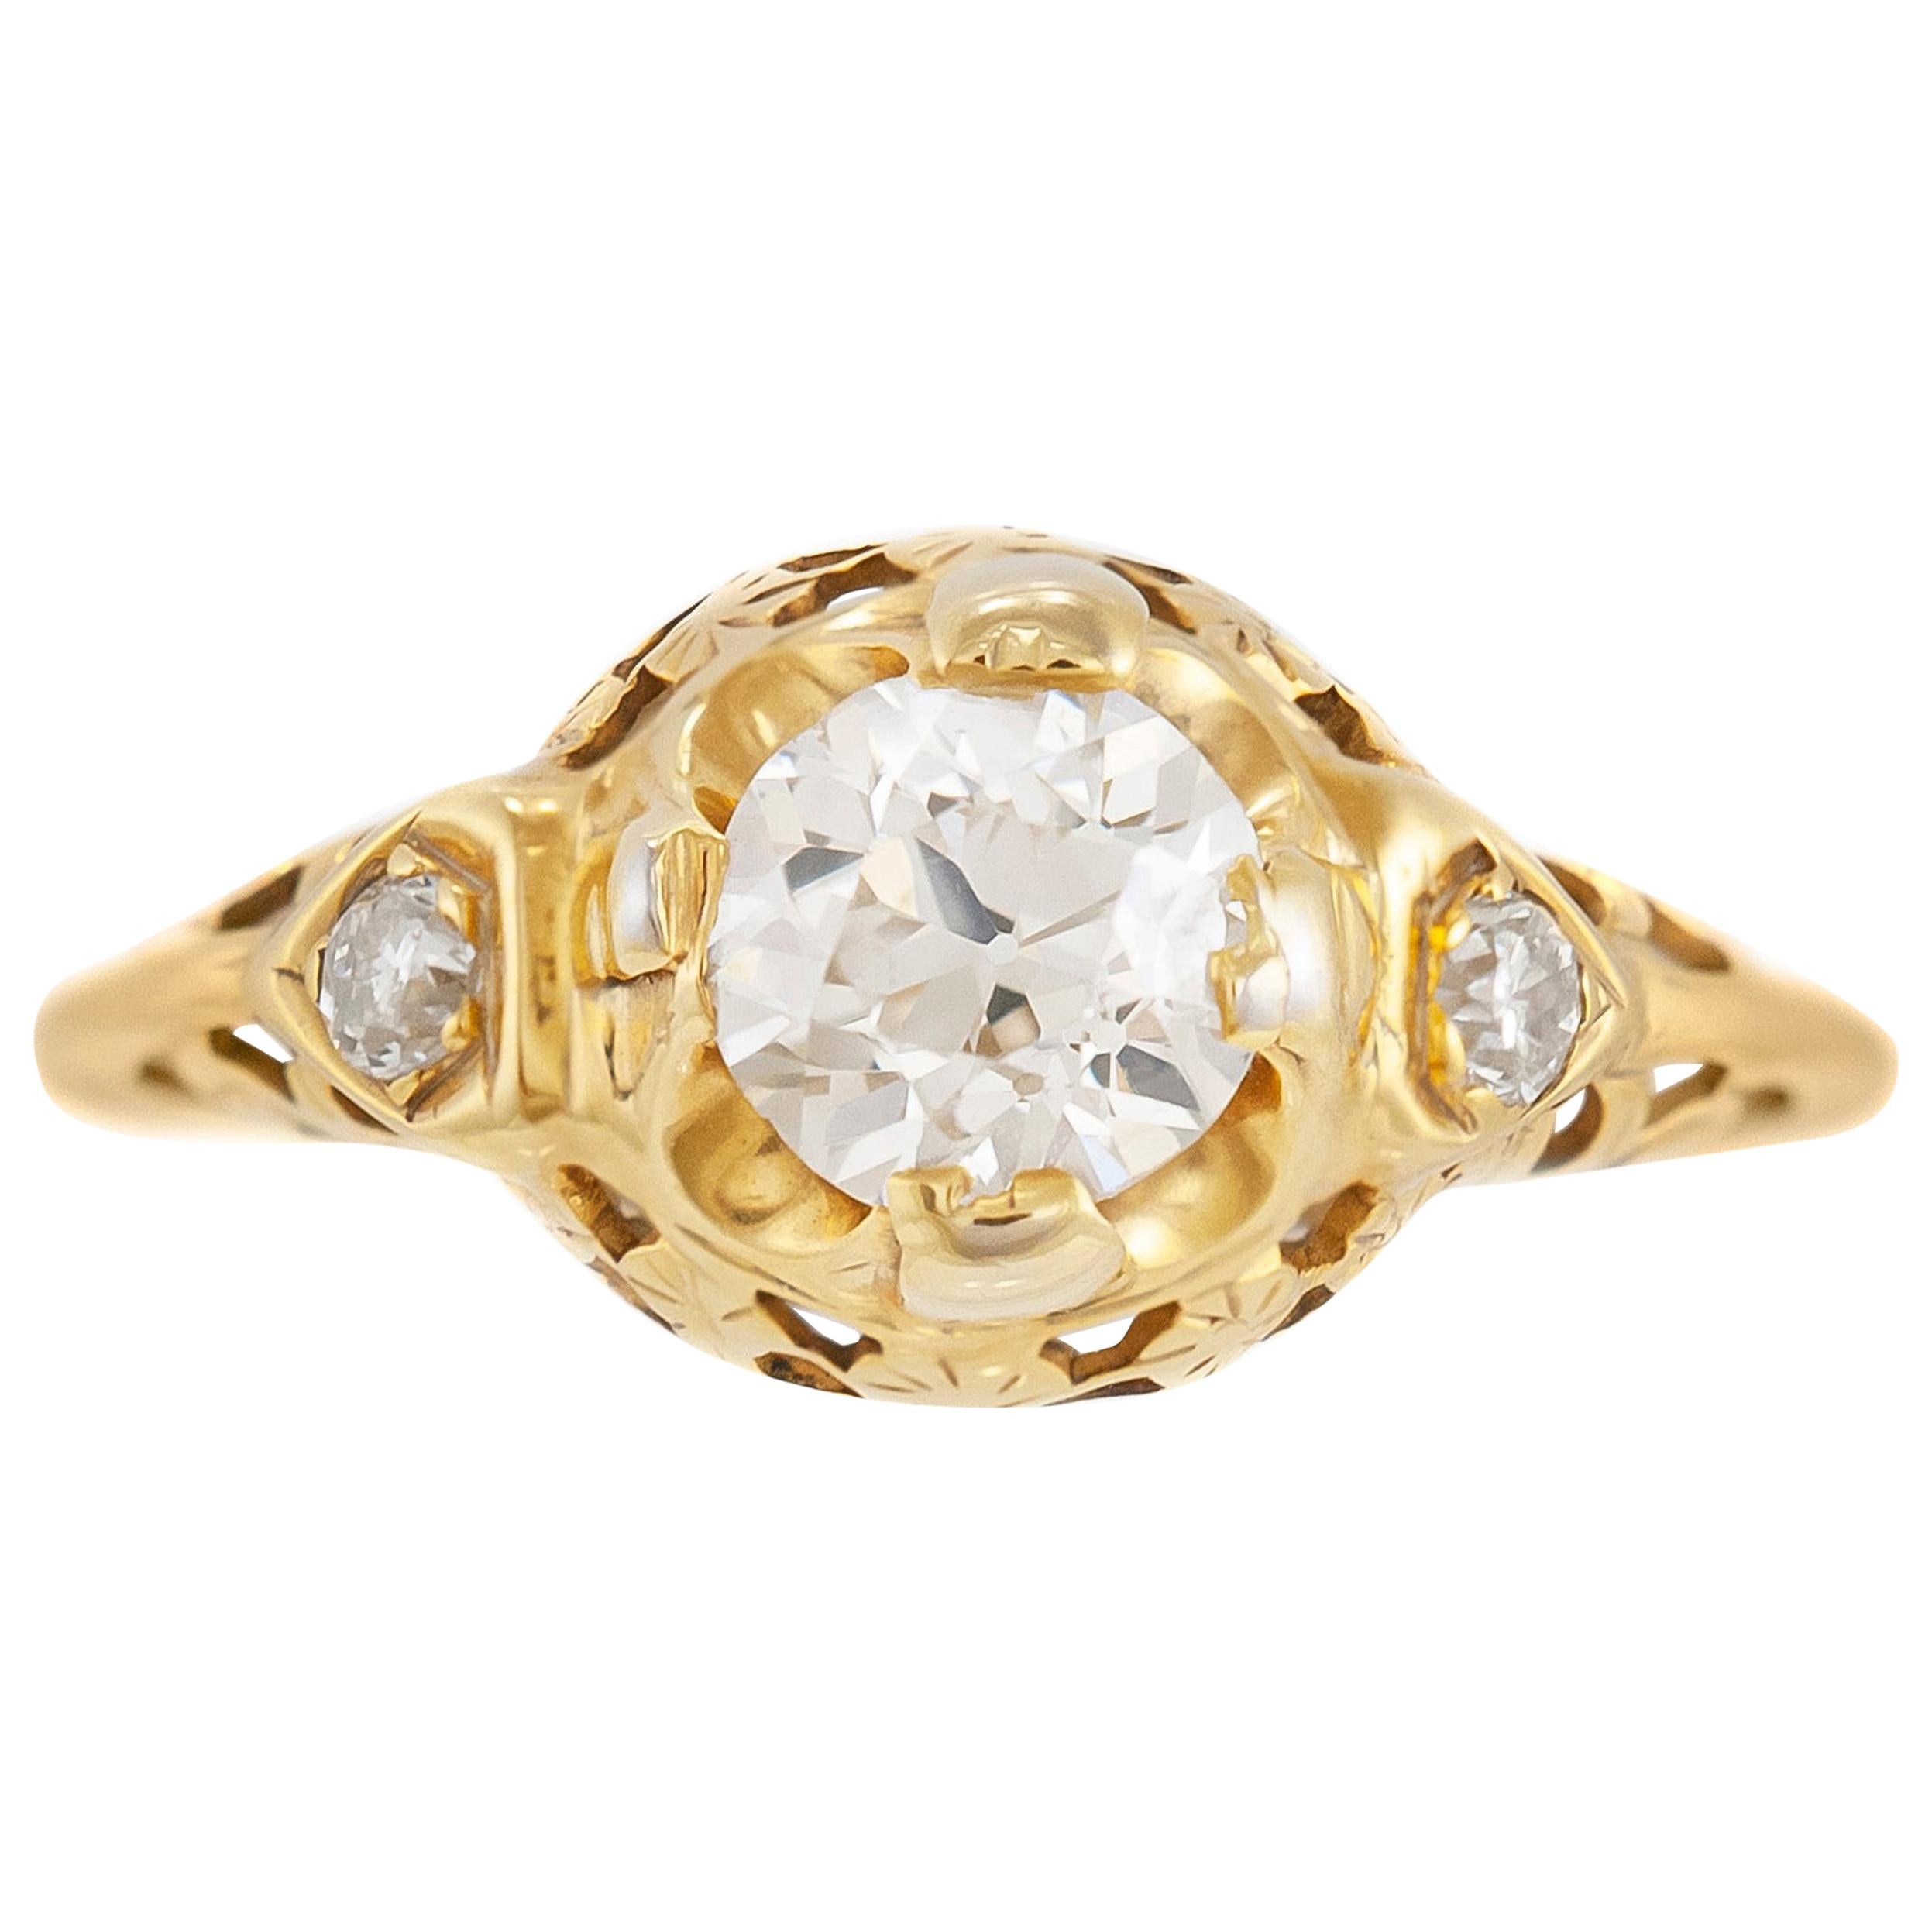 1930s 14 Karat Yellow Gold with 0.80 Carat Diamond Engagement Ring For Sale